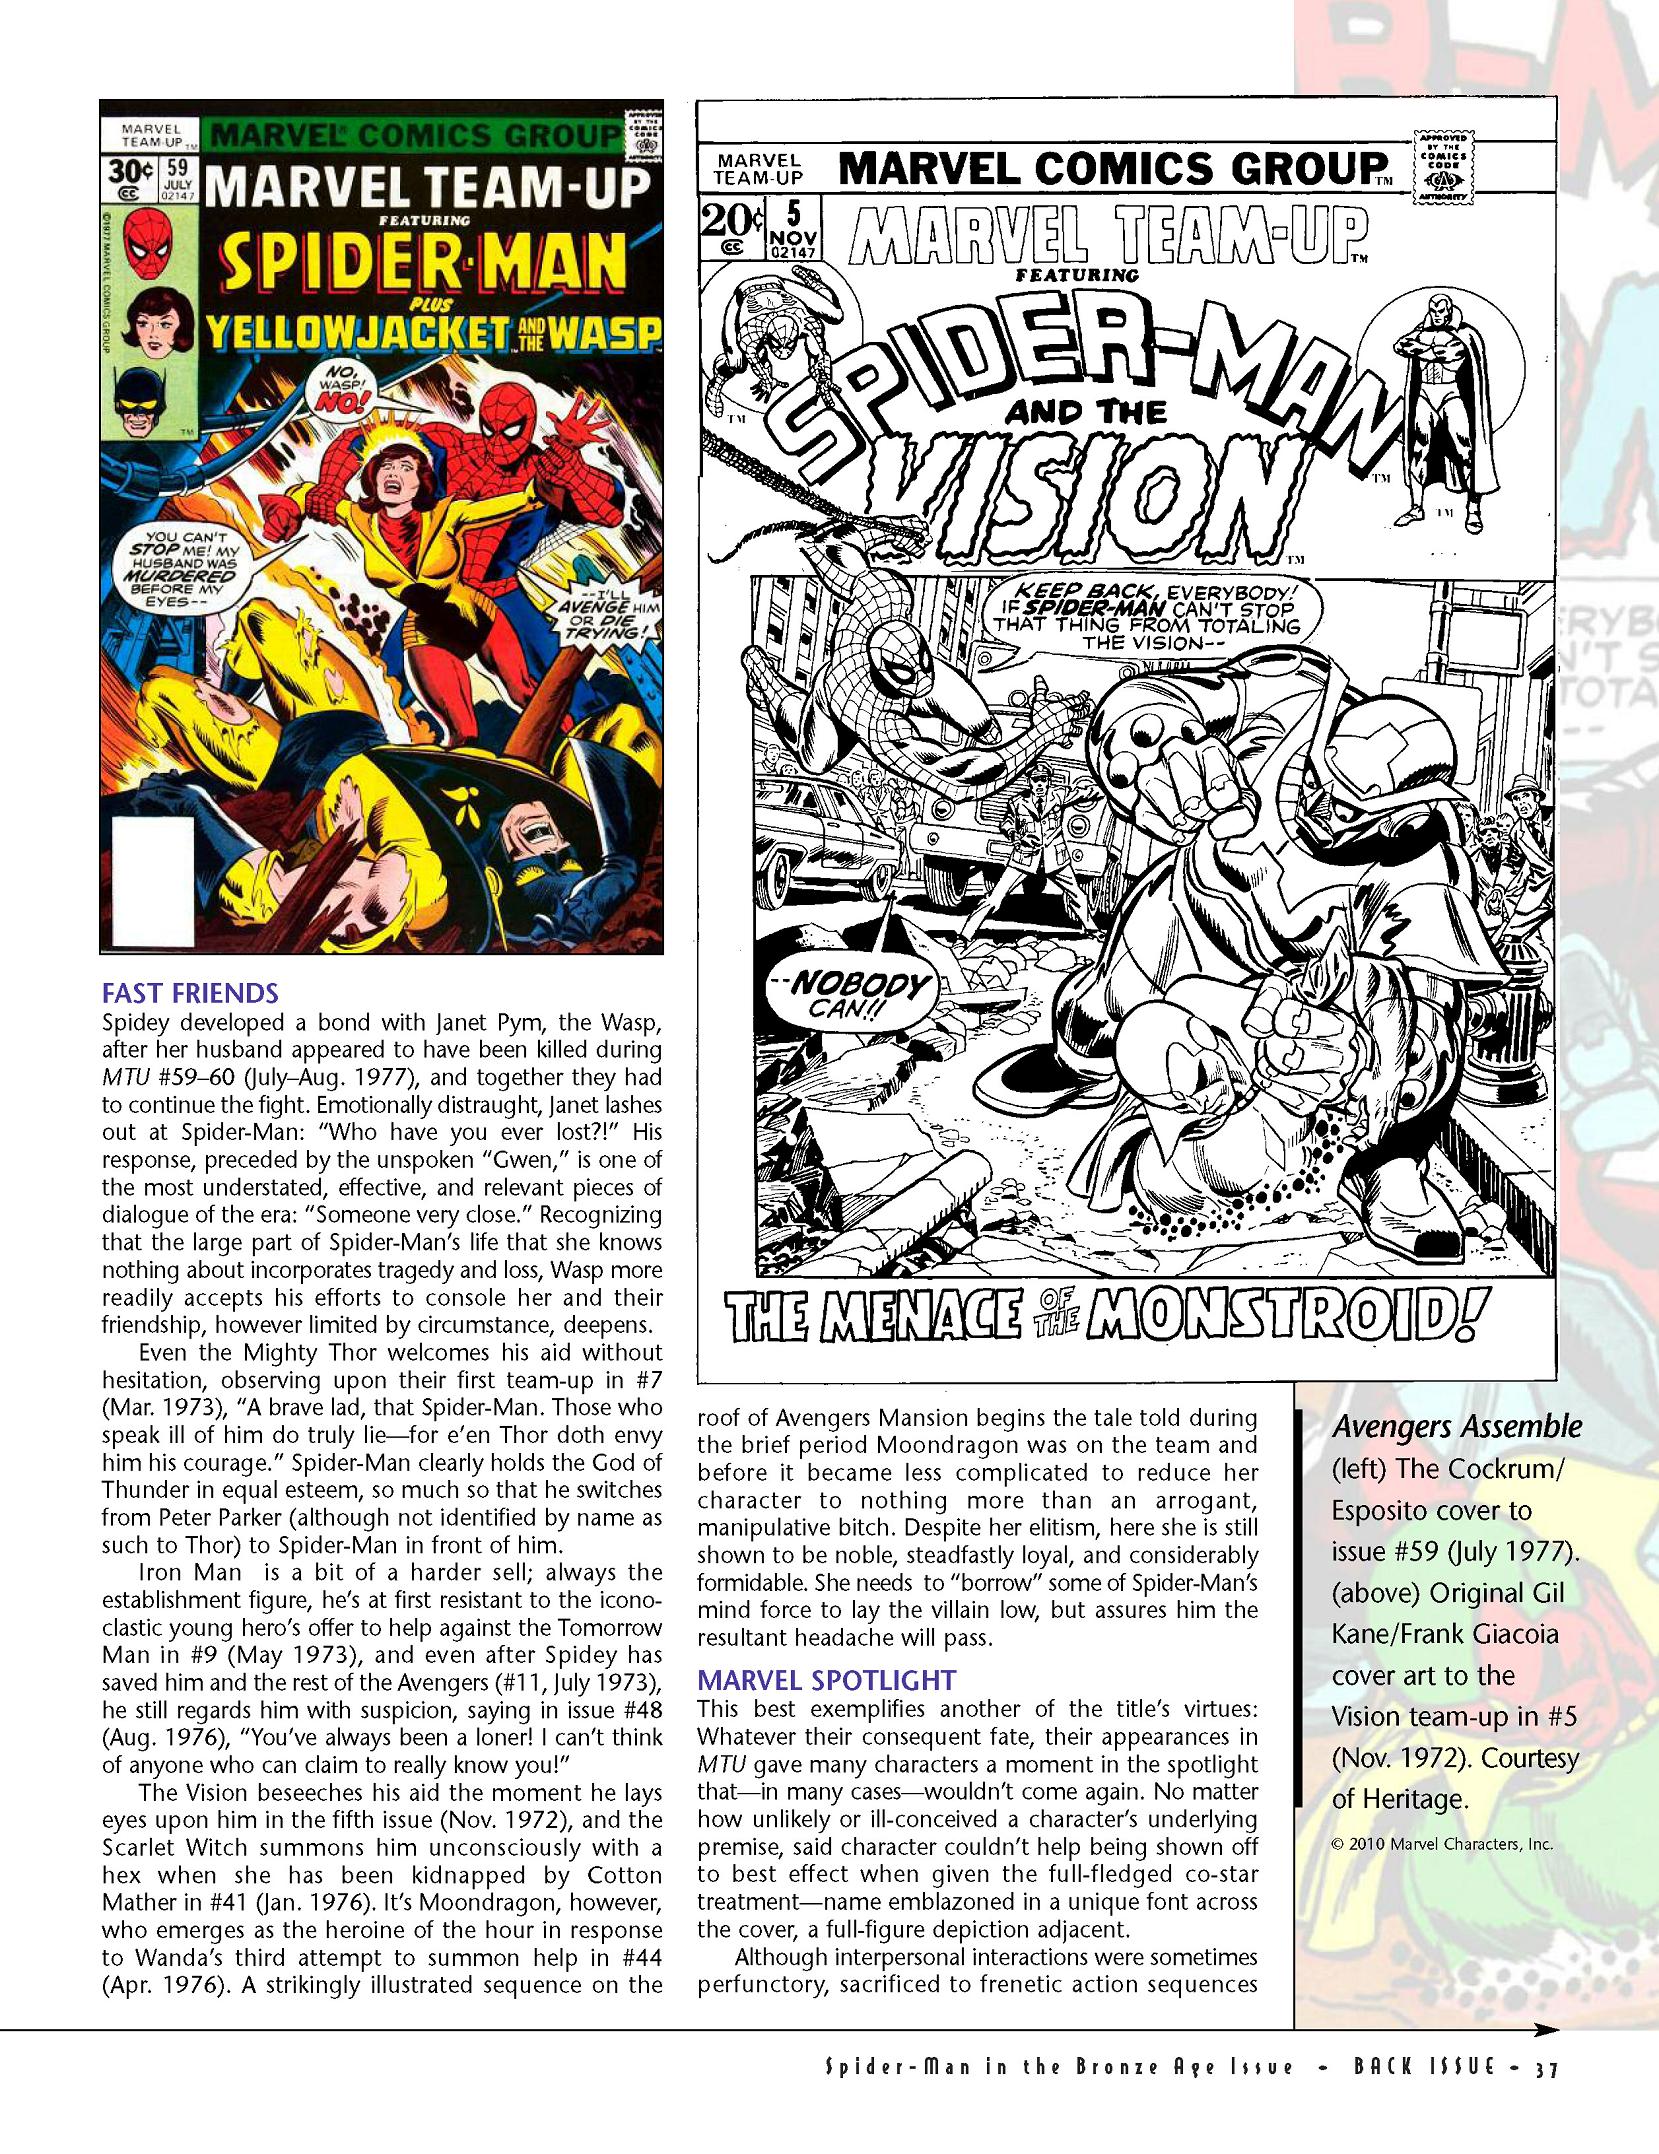 Read online Back Issue comic -  Issue #44 - 38